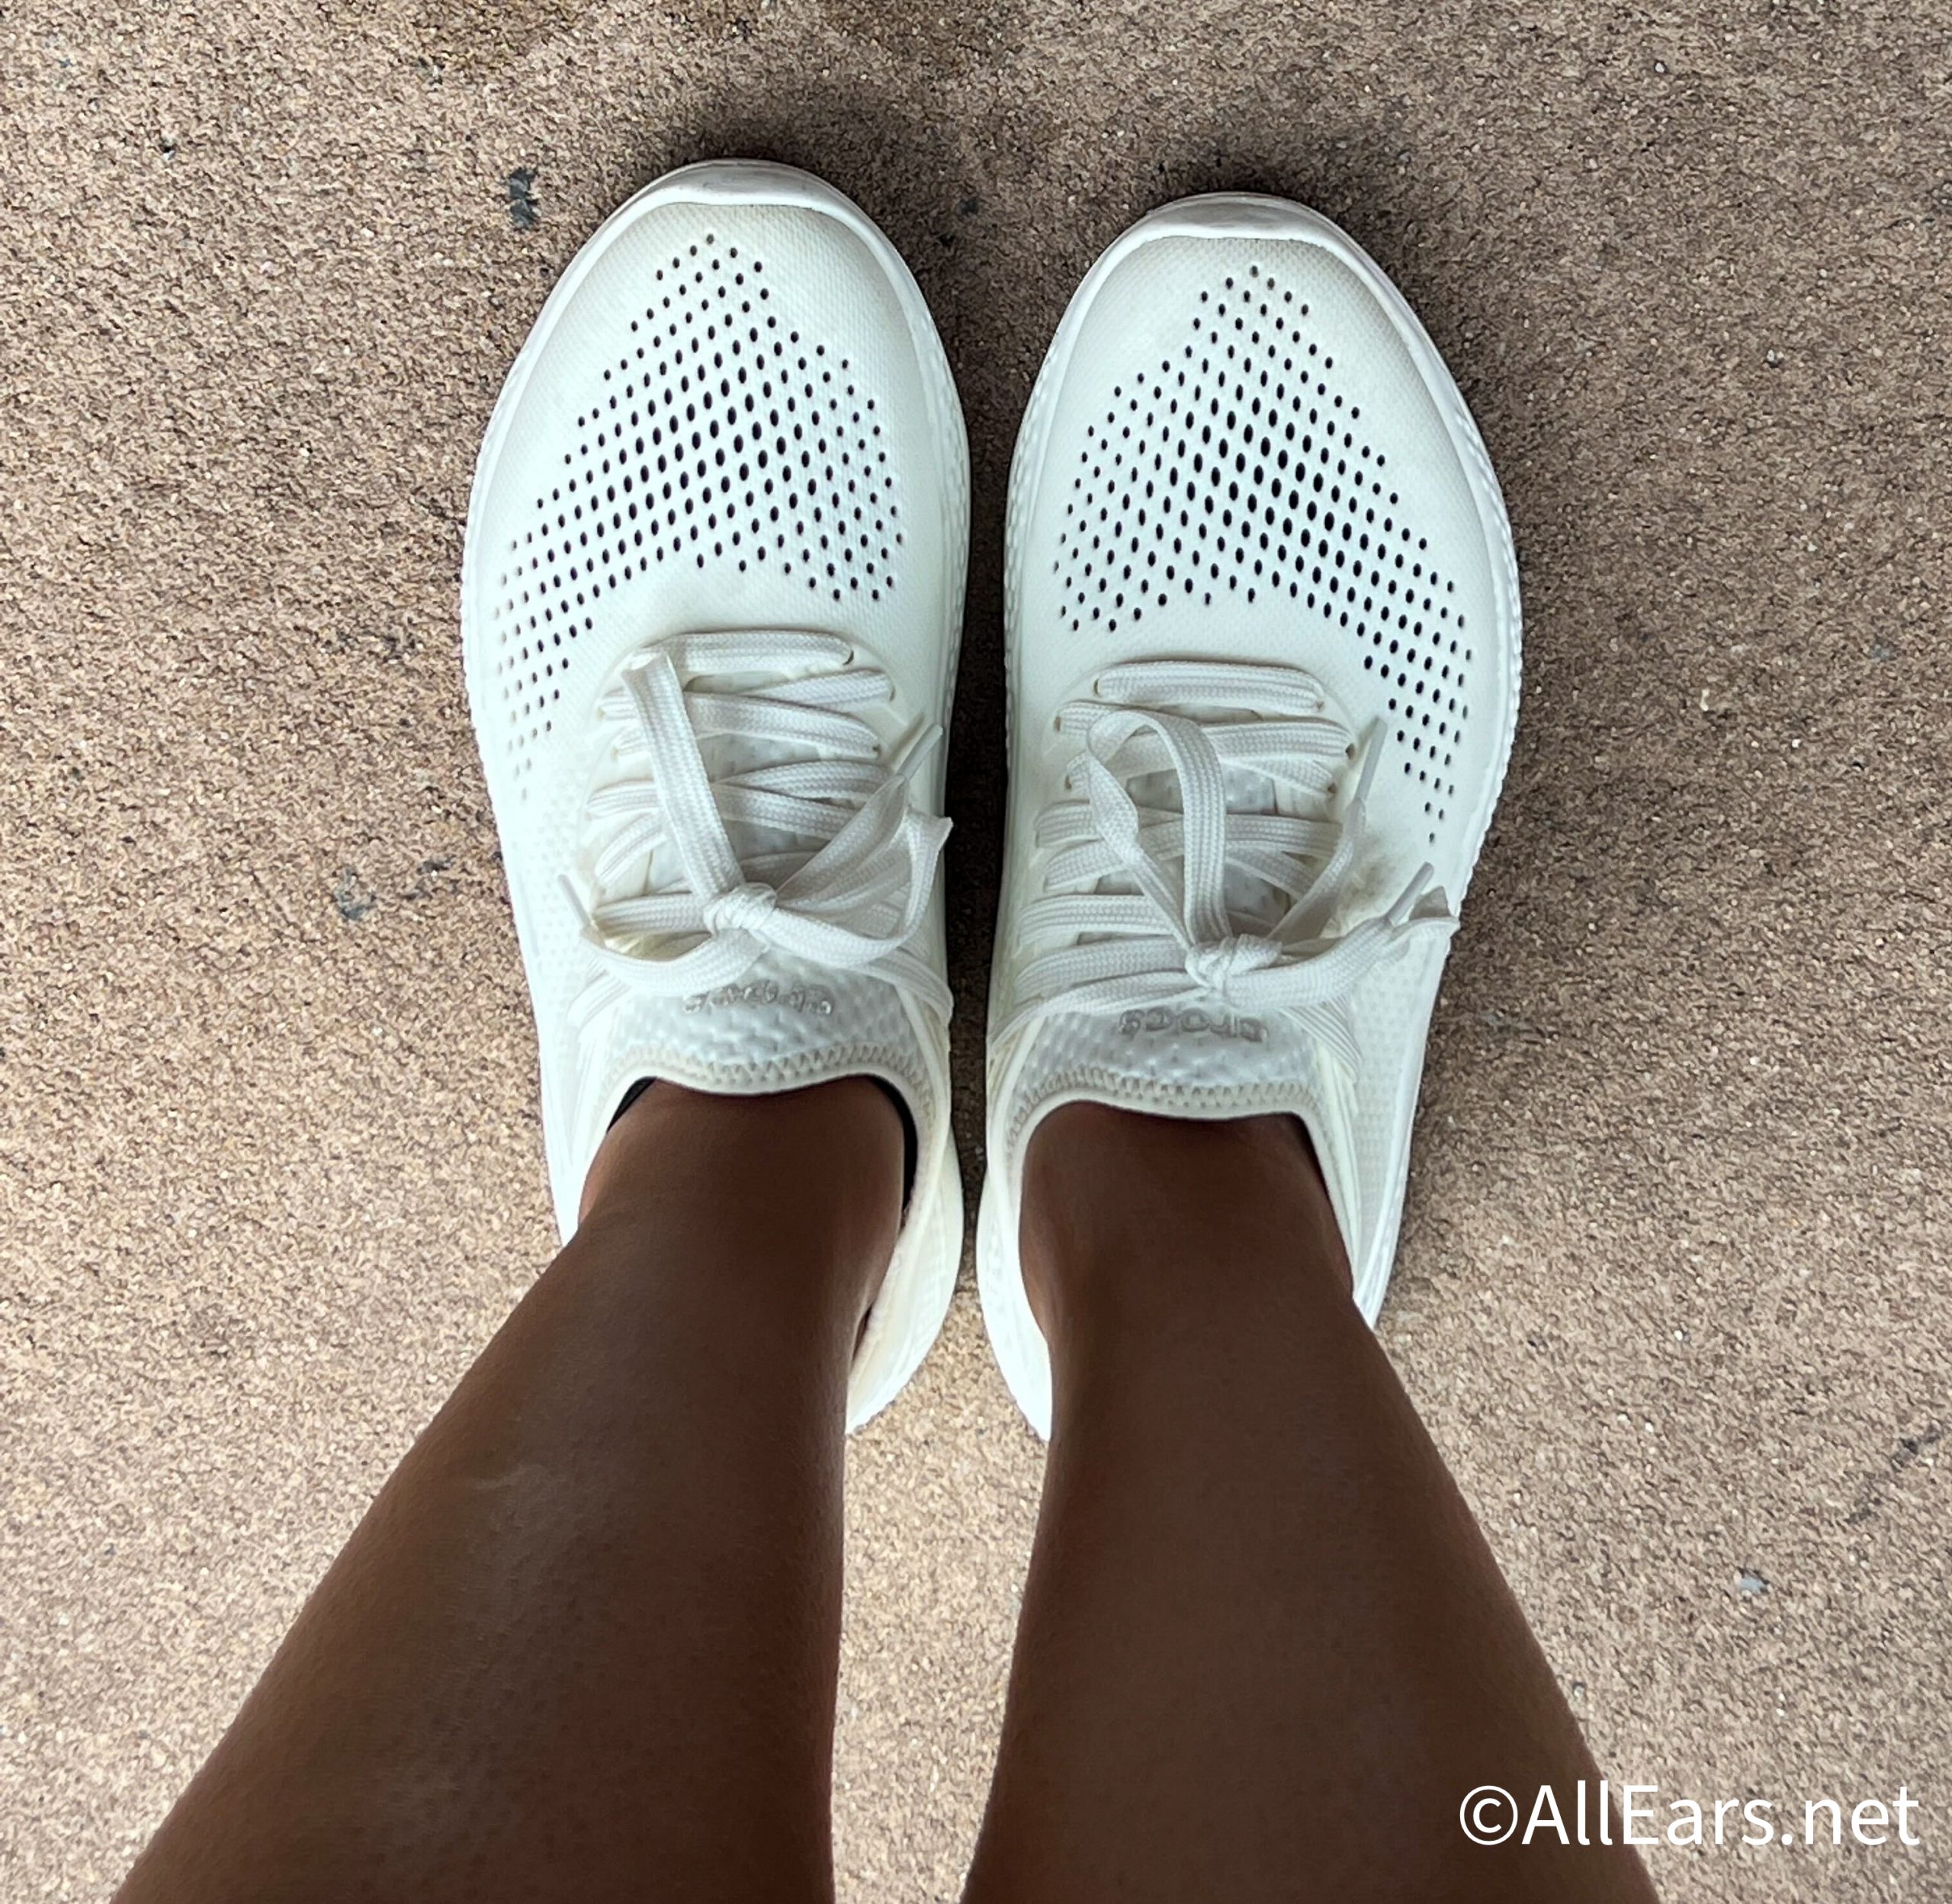 These Crocs Are WINNING the Disney World Shoe Game! - AllEars.Net